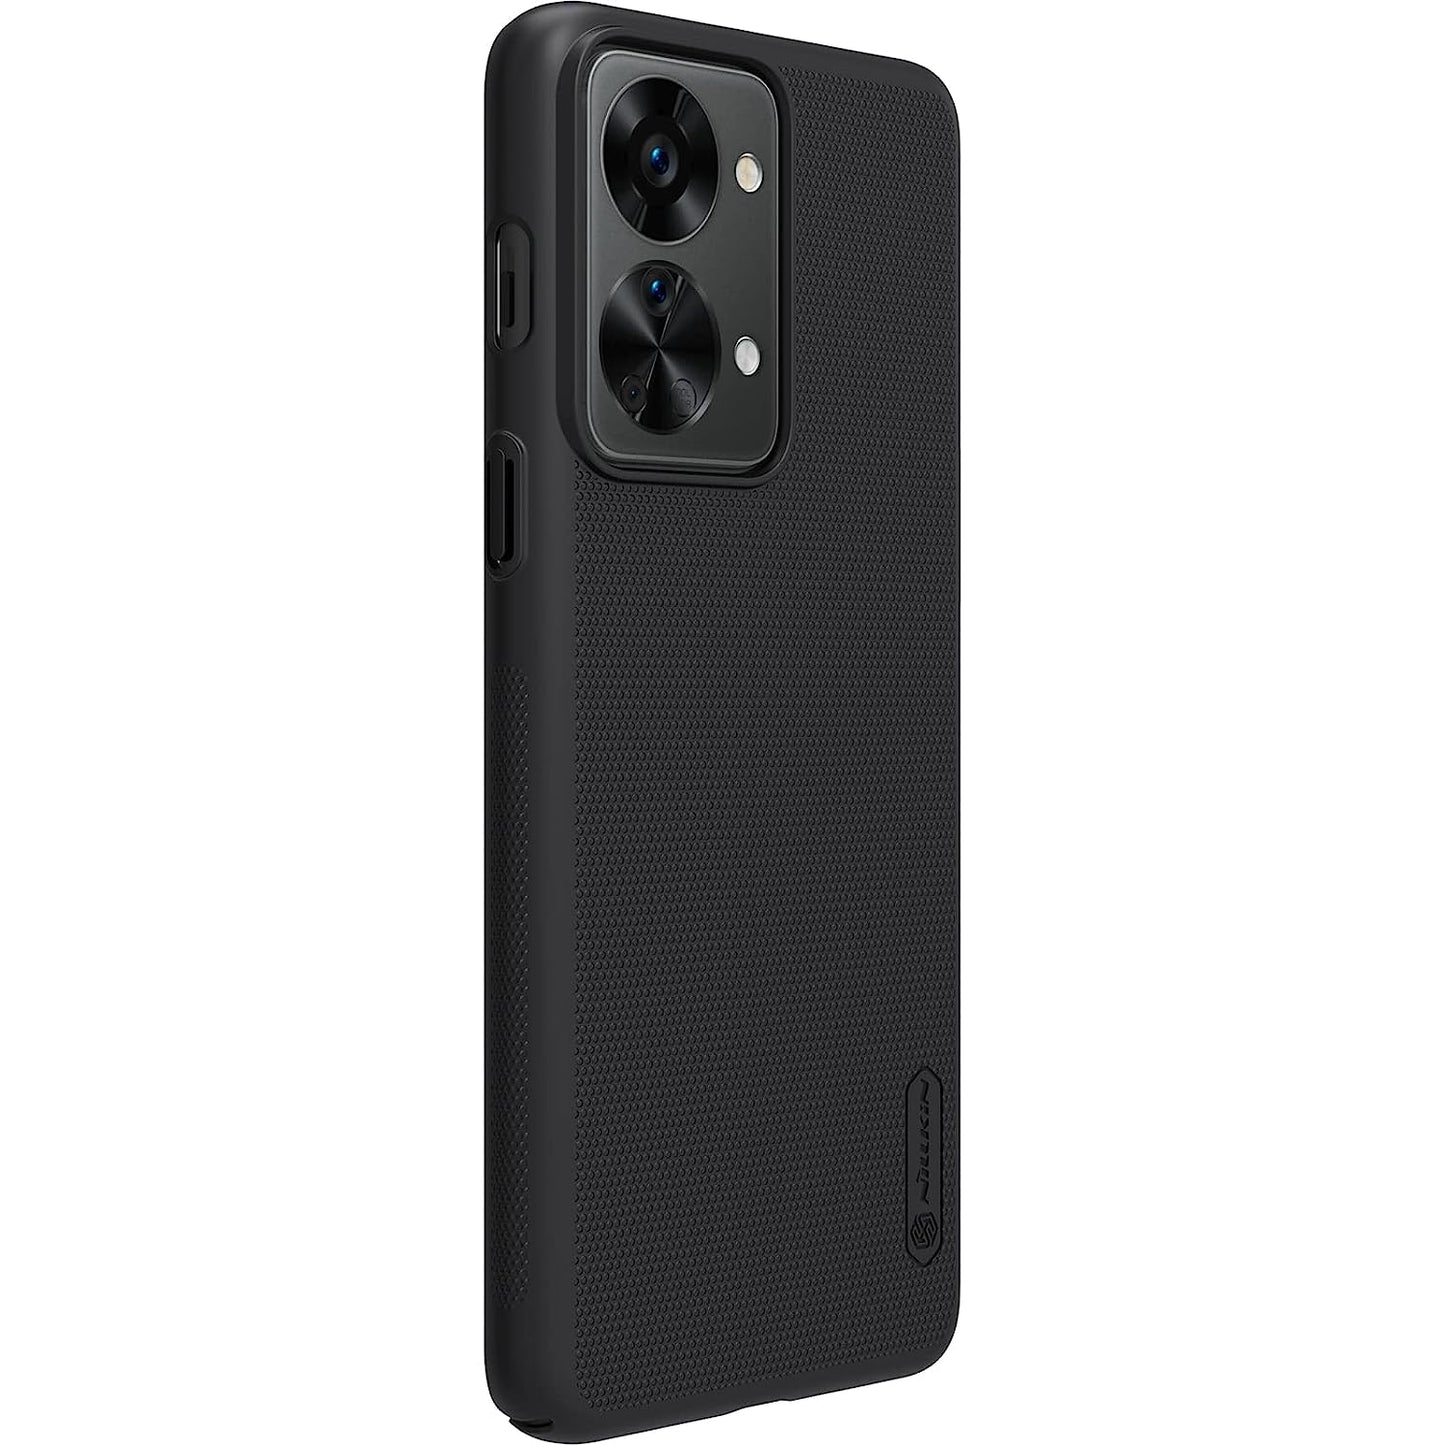 Nillkin Case for OnePlus Nord 2T 5G (6.43" Inch) Super Frosted Hard Back Dotted Grip Cover PC Black Color